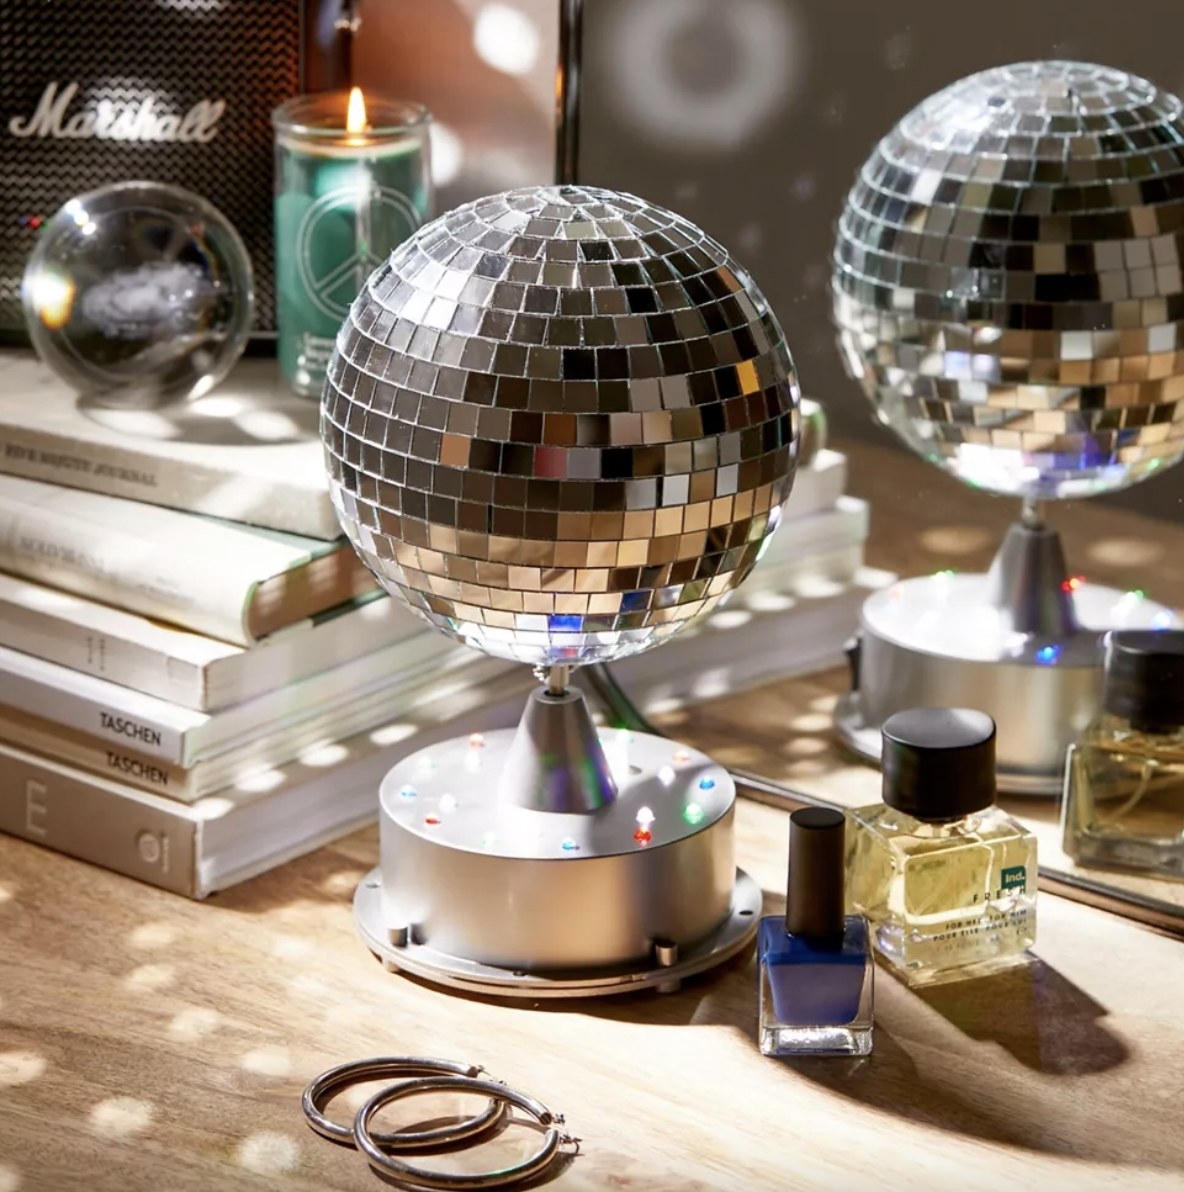 A disco ball speaker by two nail polish bottles and a stack of books